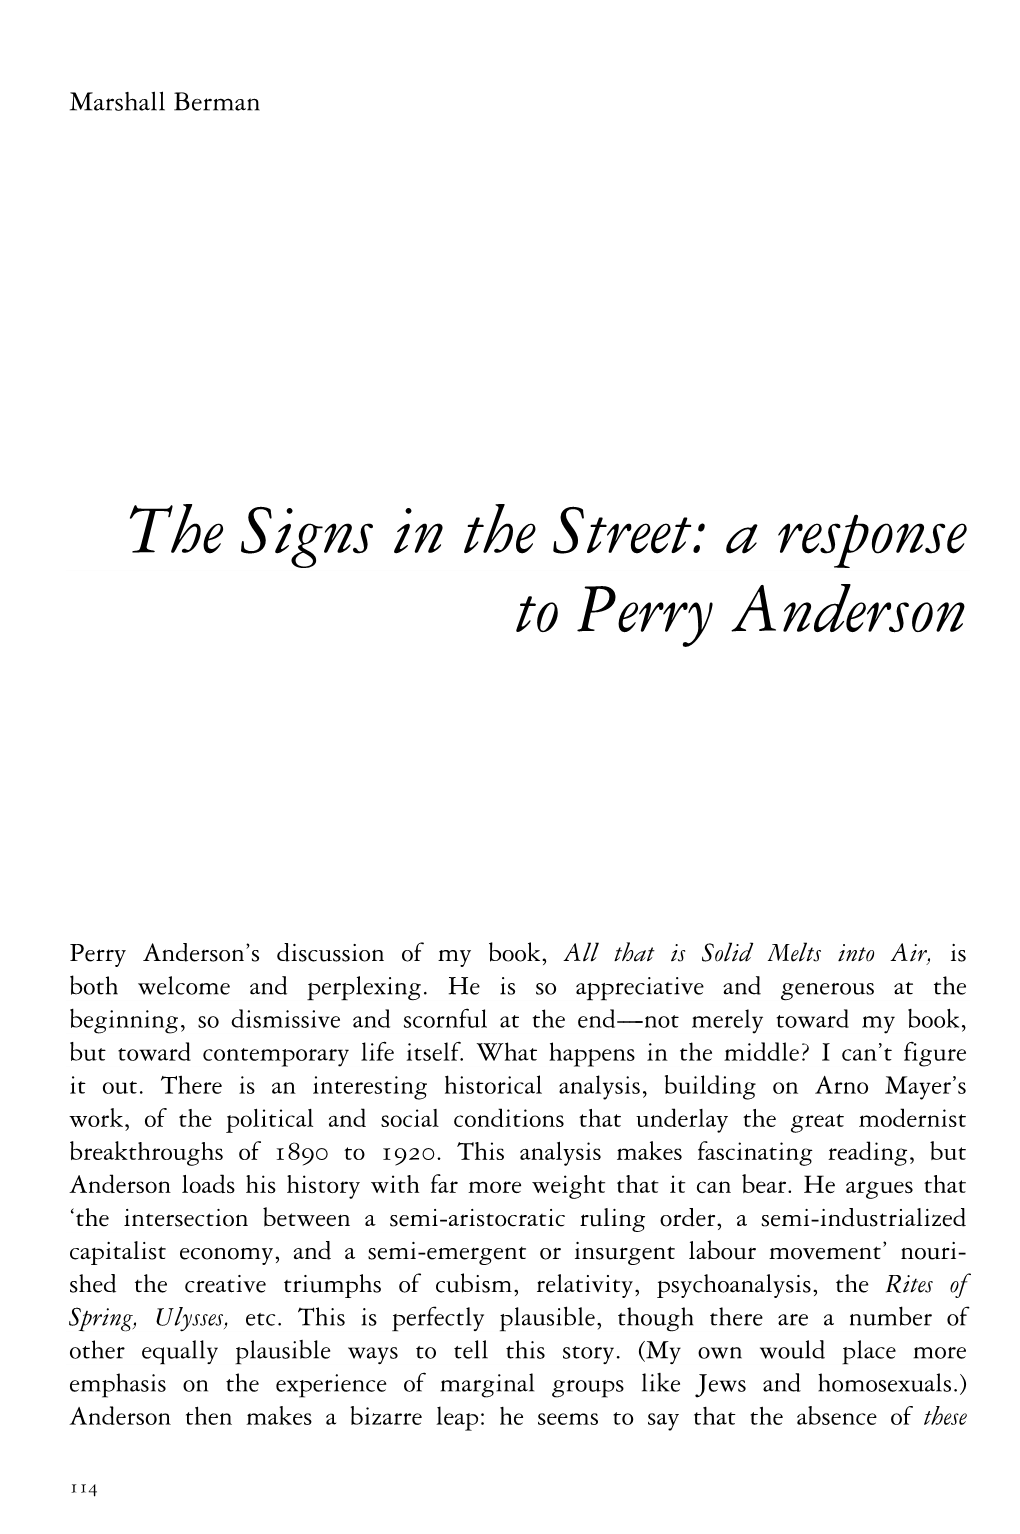 The Signs in the Street: a Response to Perry Anderson